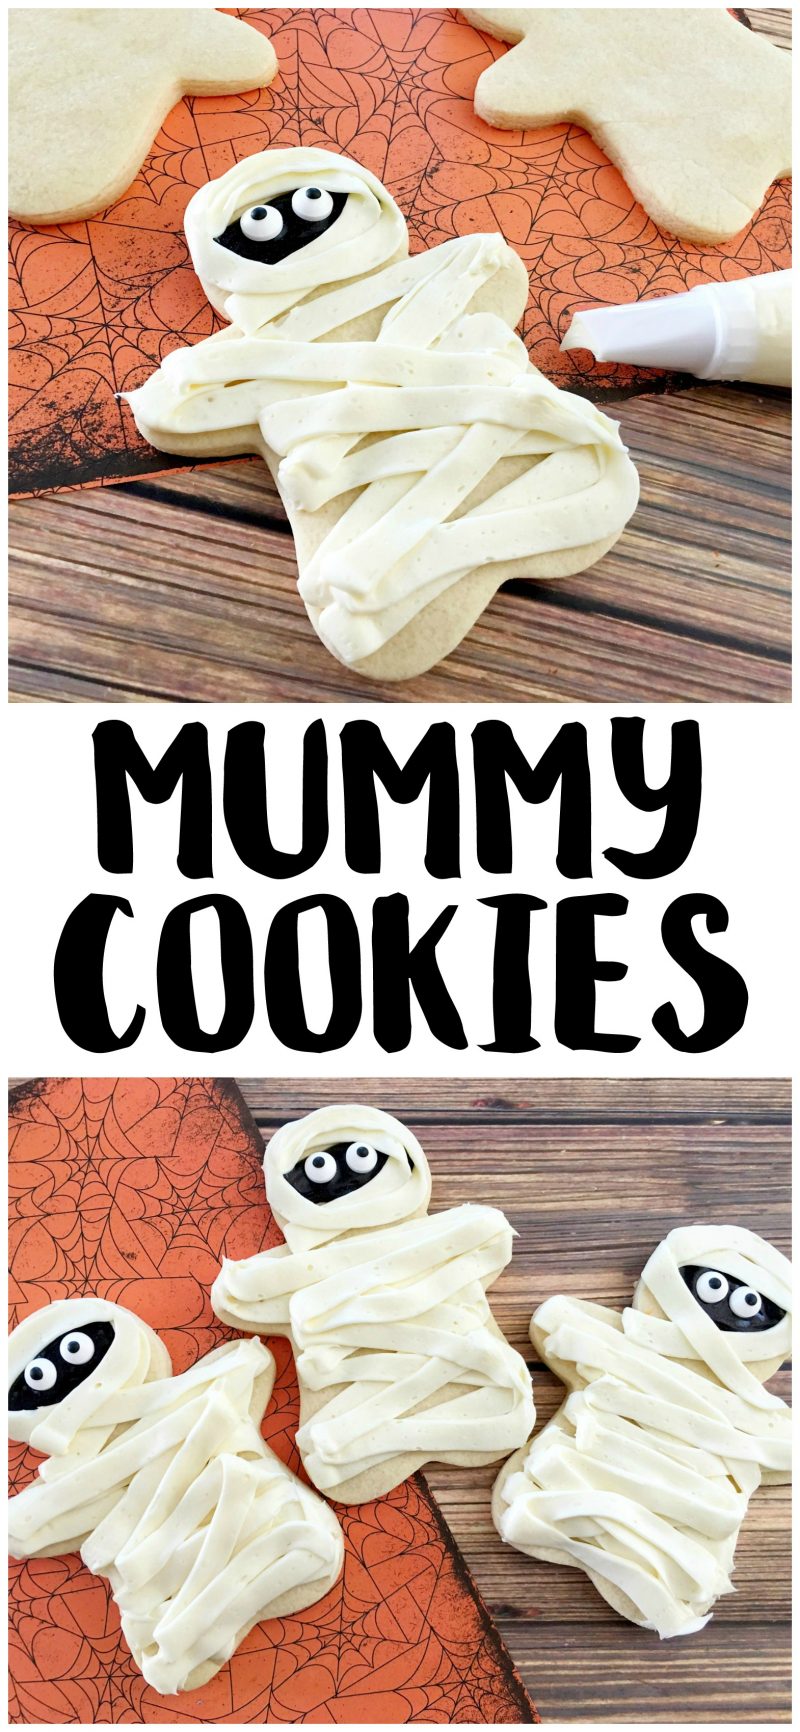 These easy DIY Homemade Halloween cookies taste like sugar cookies with a hint of pumpkin- and they are decorated like mummies! While they look super cute, they are easy to make and they’re one of my favorite Halloween recipes for kids.